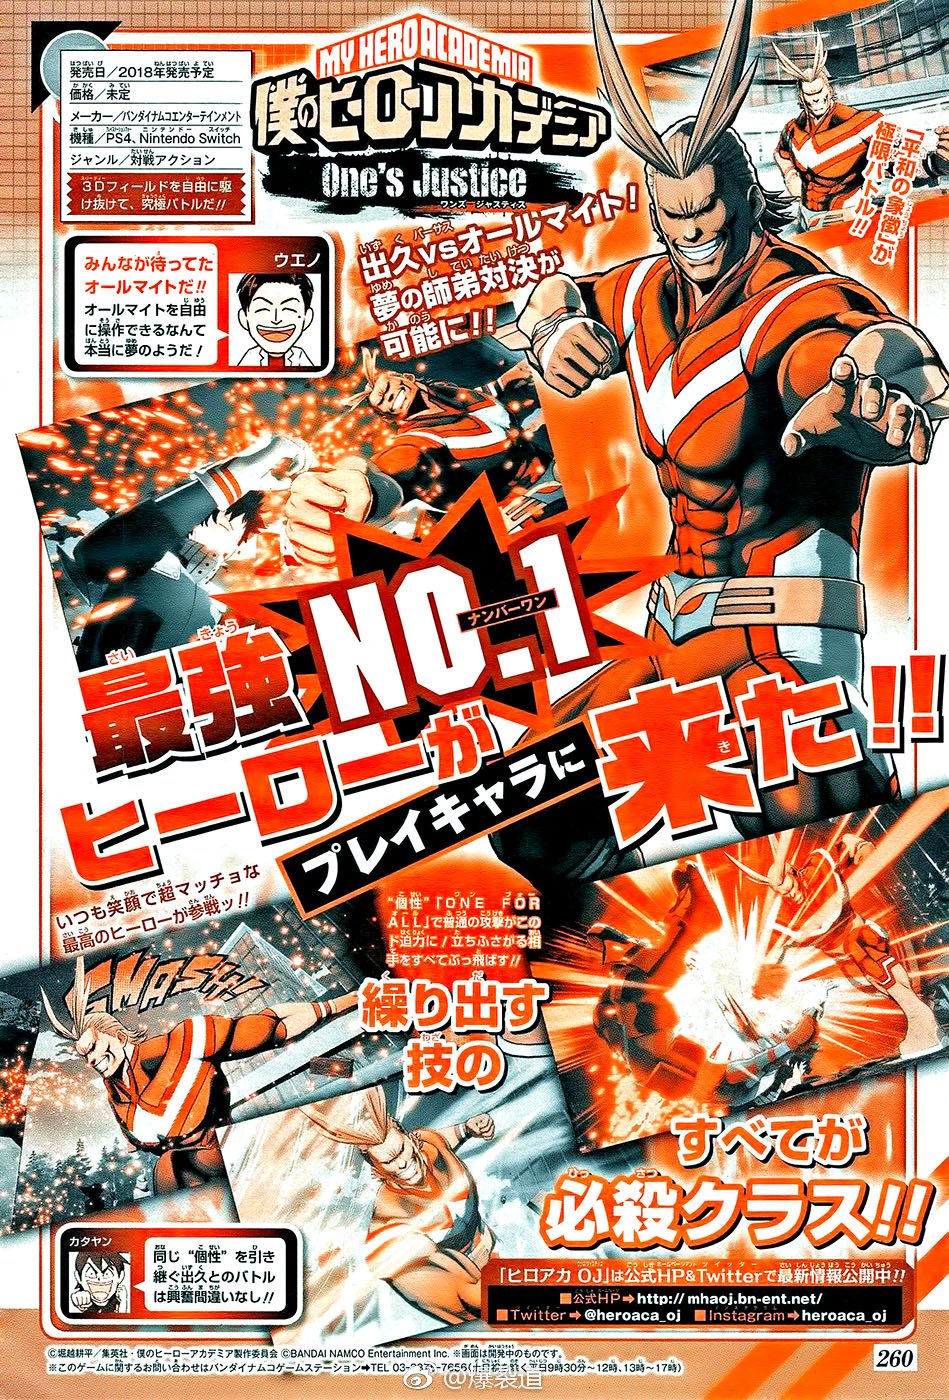 My-Hero-Academia-Ones-Justice-scan-All-Might-19-01-2018